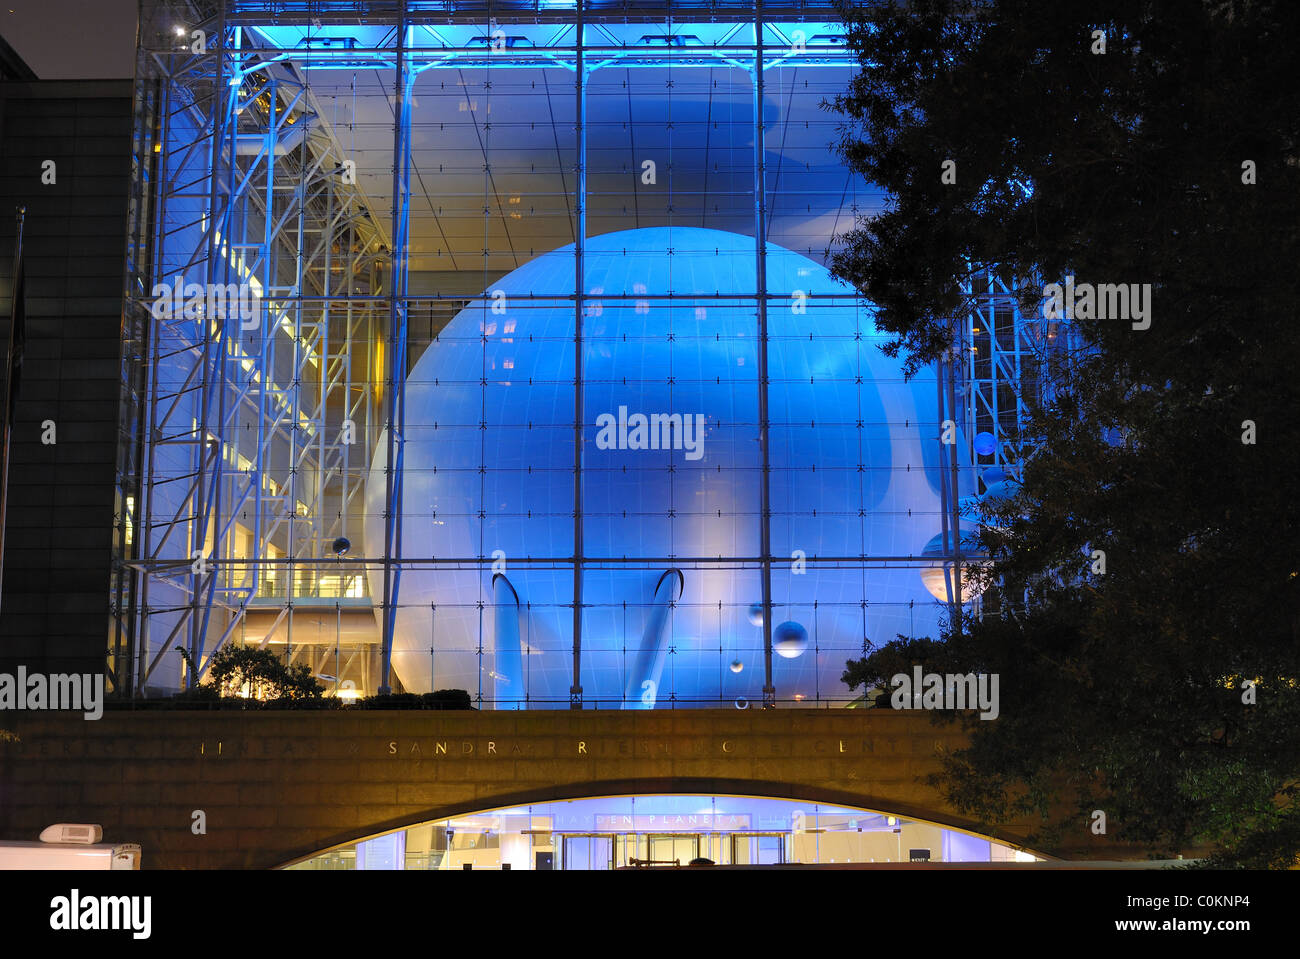 Rose Center for Earth and Space Sciences at the American Museum of Natural History in New York CIty. Stock Photo